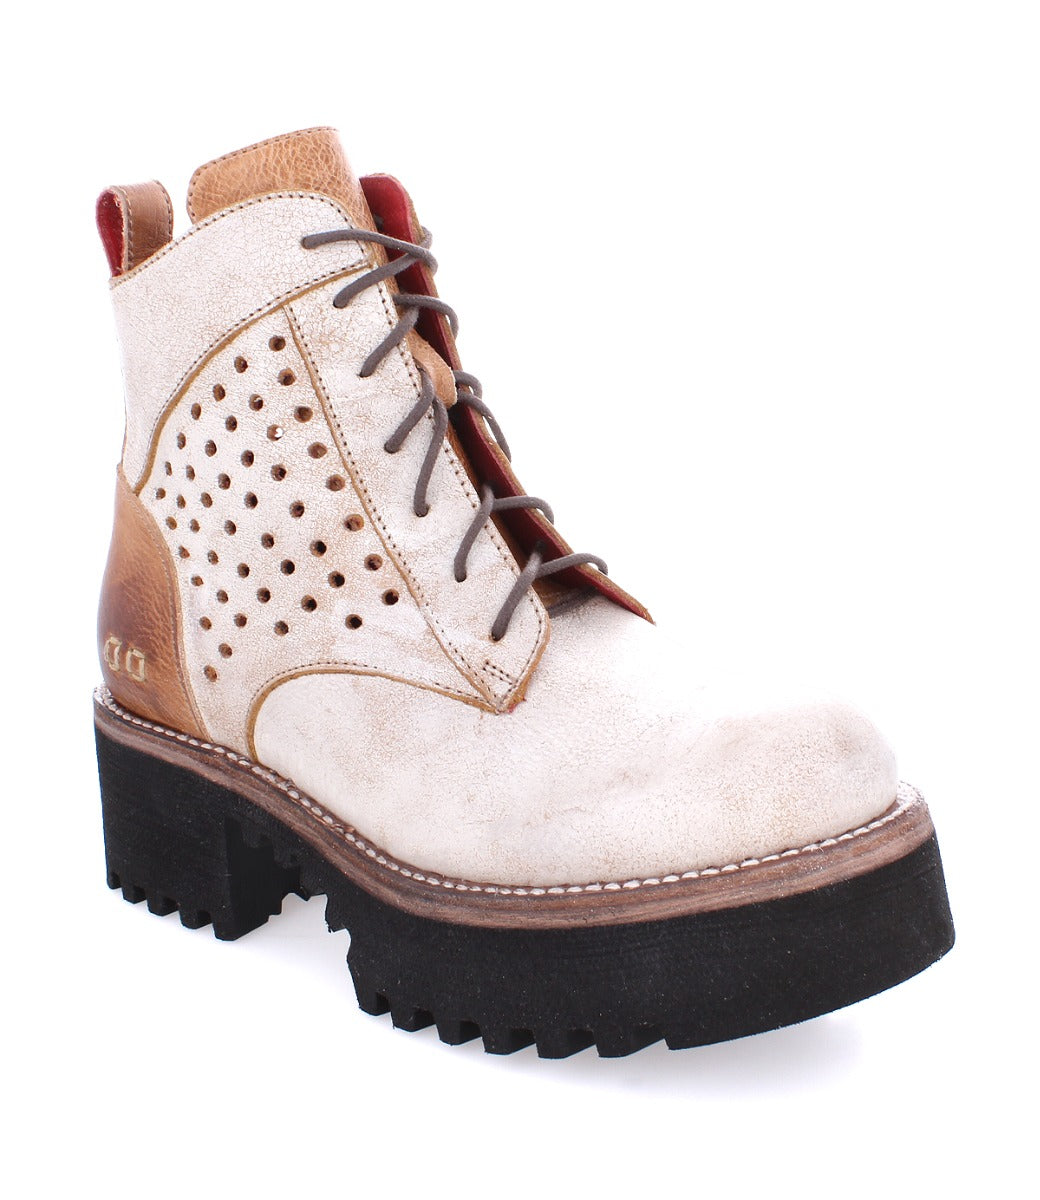 A women's Tanzania by Bed Stu, white and brown boot with a perforated sole.